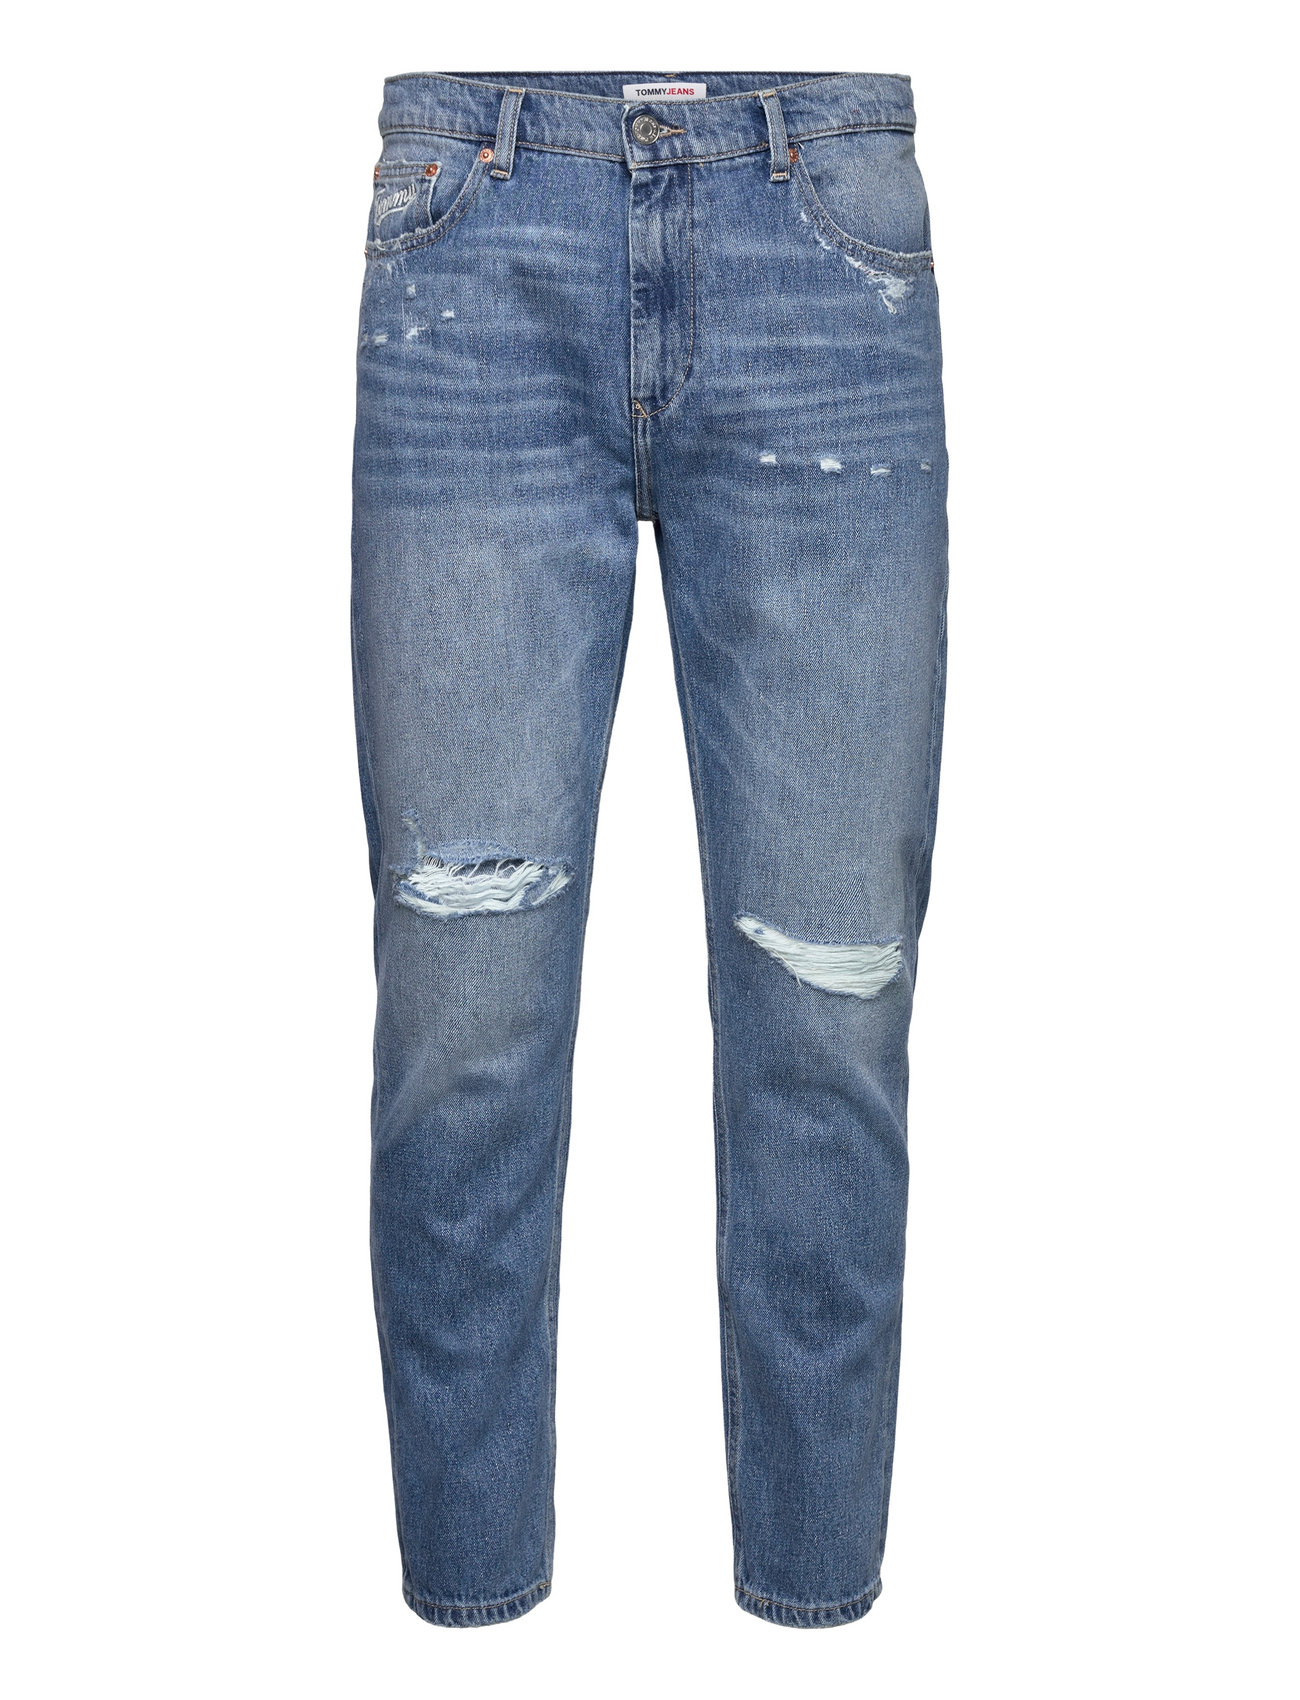 Tommy Jeans Dad Jean Rglr Tprd Ag8013 - Jeans - Boozt.com